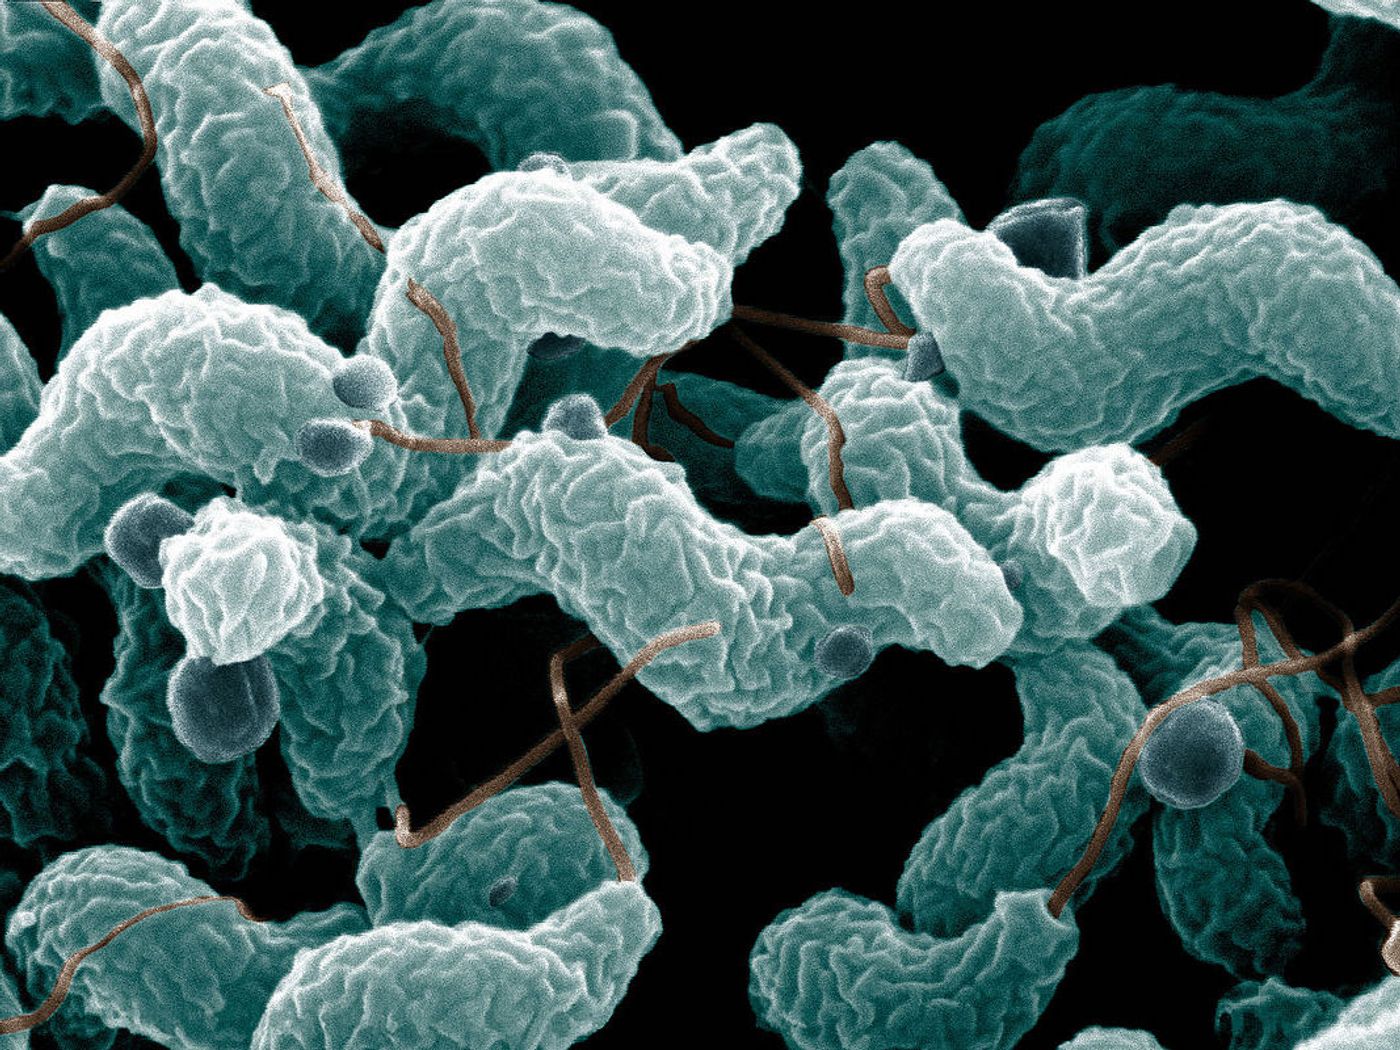 Gut bacteria / Credit: Wikipedia Commons